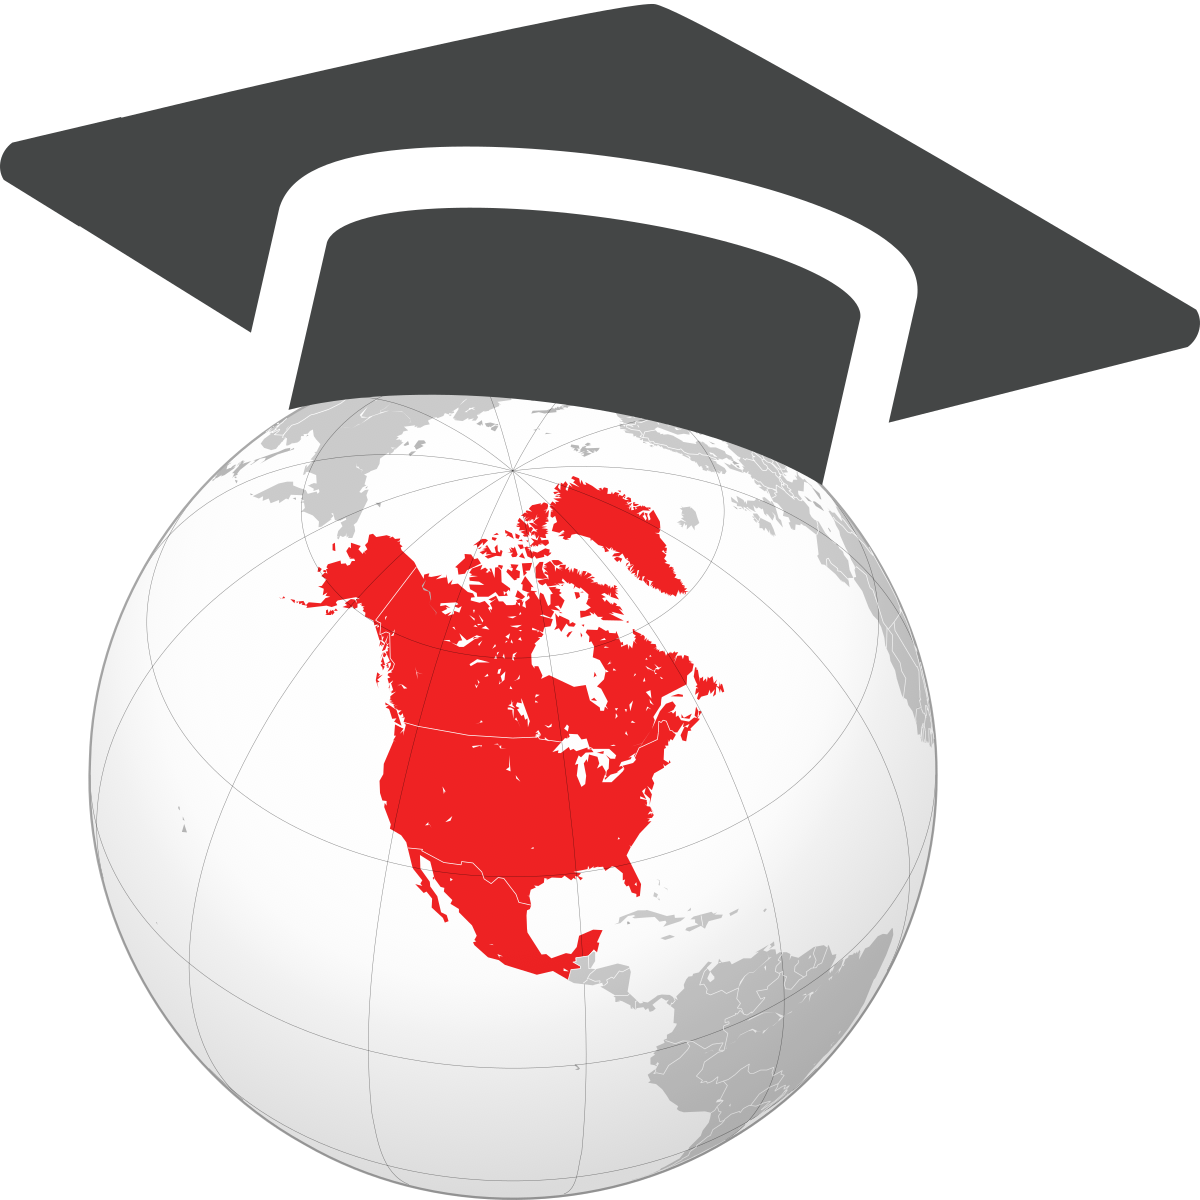 Higher Education and Universities in North America